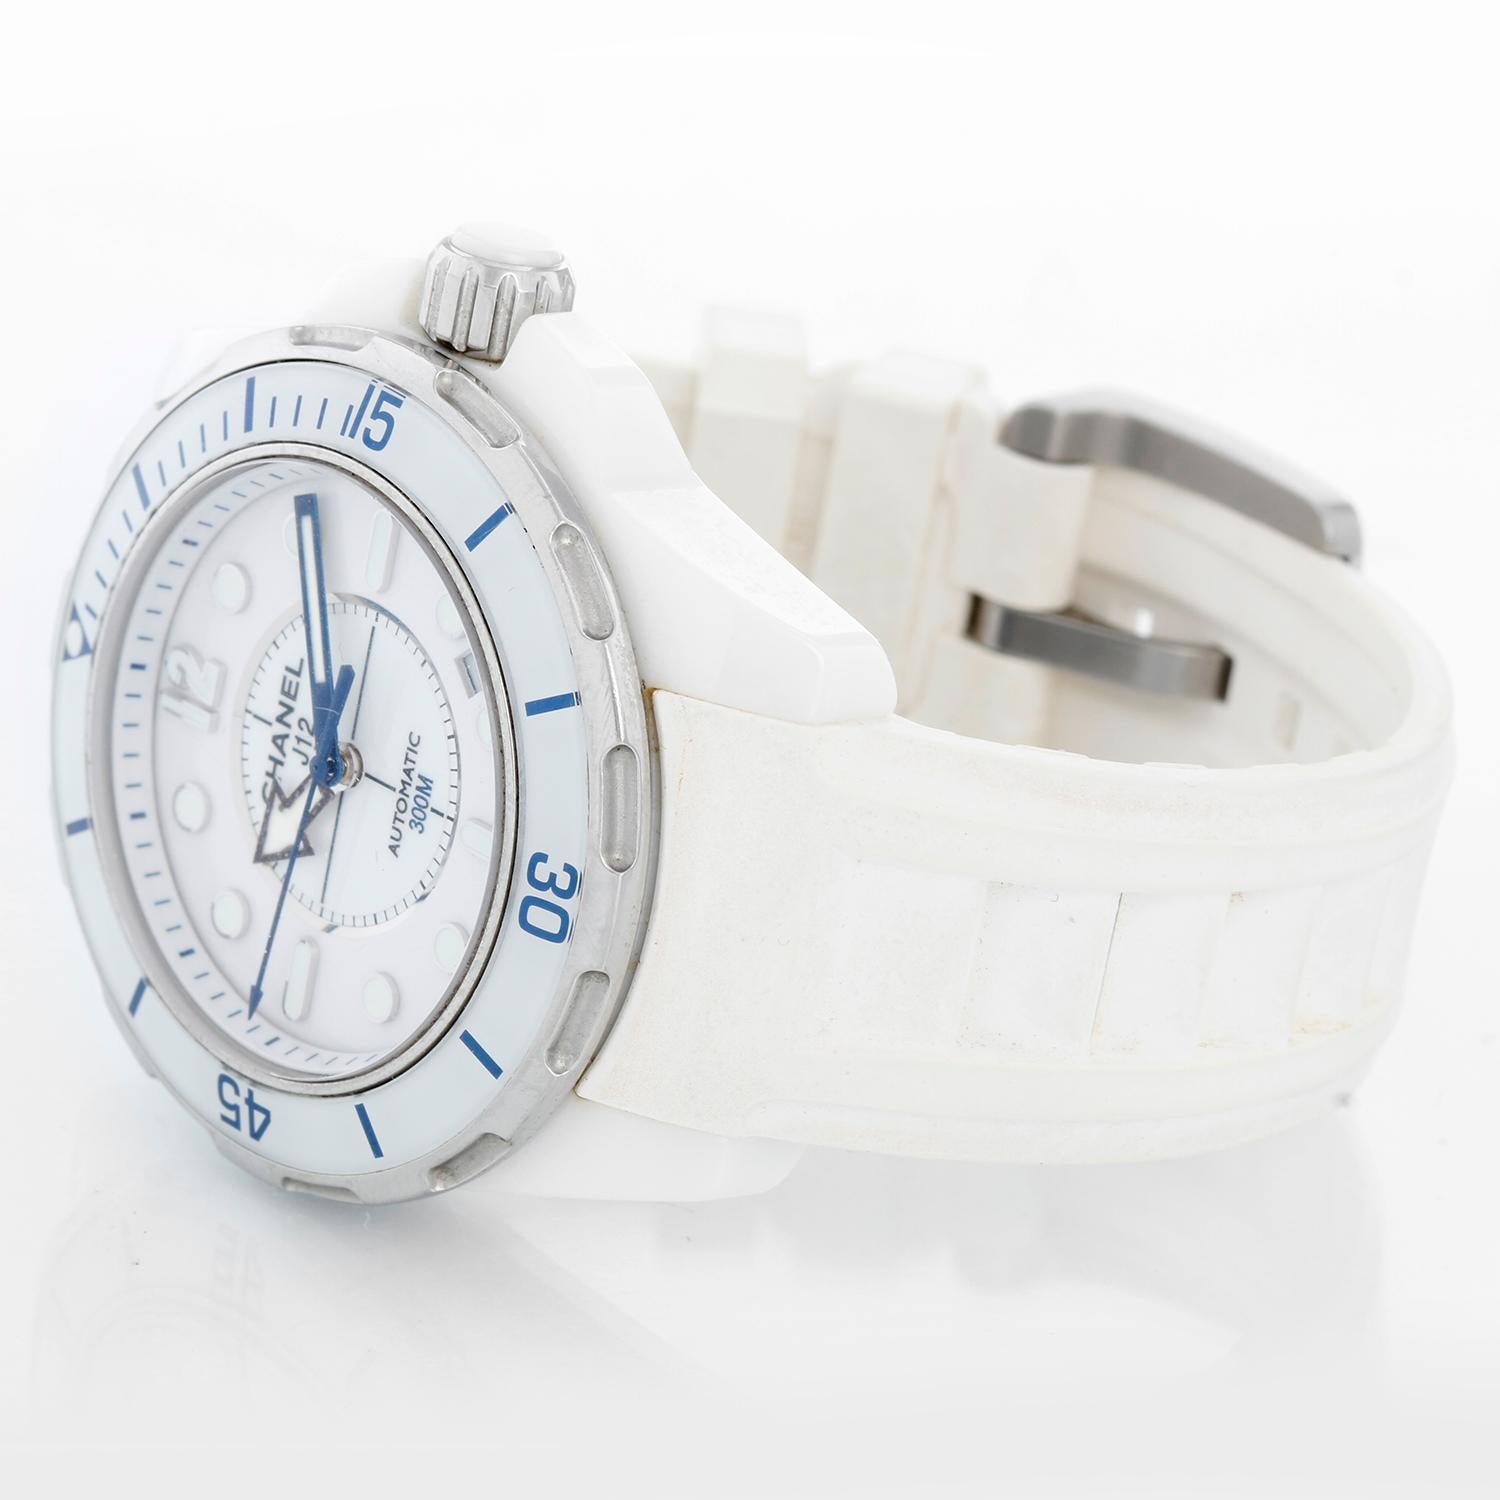 Chanel J12 Marine Ladies Ceramic Watch H2560 - Automatic winding with date. White ceramic case; stainless steel bezel with white bezel insert (38mm diameter). White dial with luminous style markers. White rubber strap with tang buckle. Pre-owned